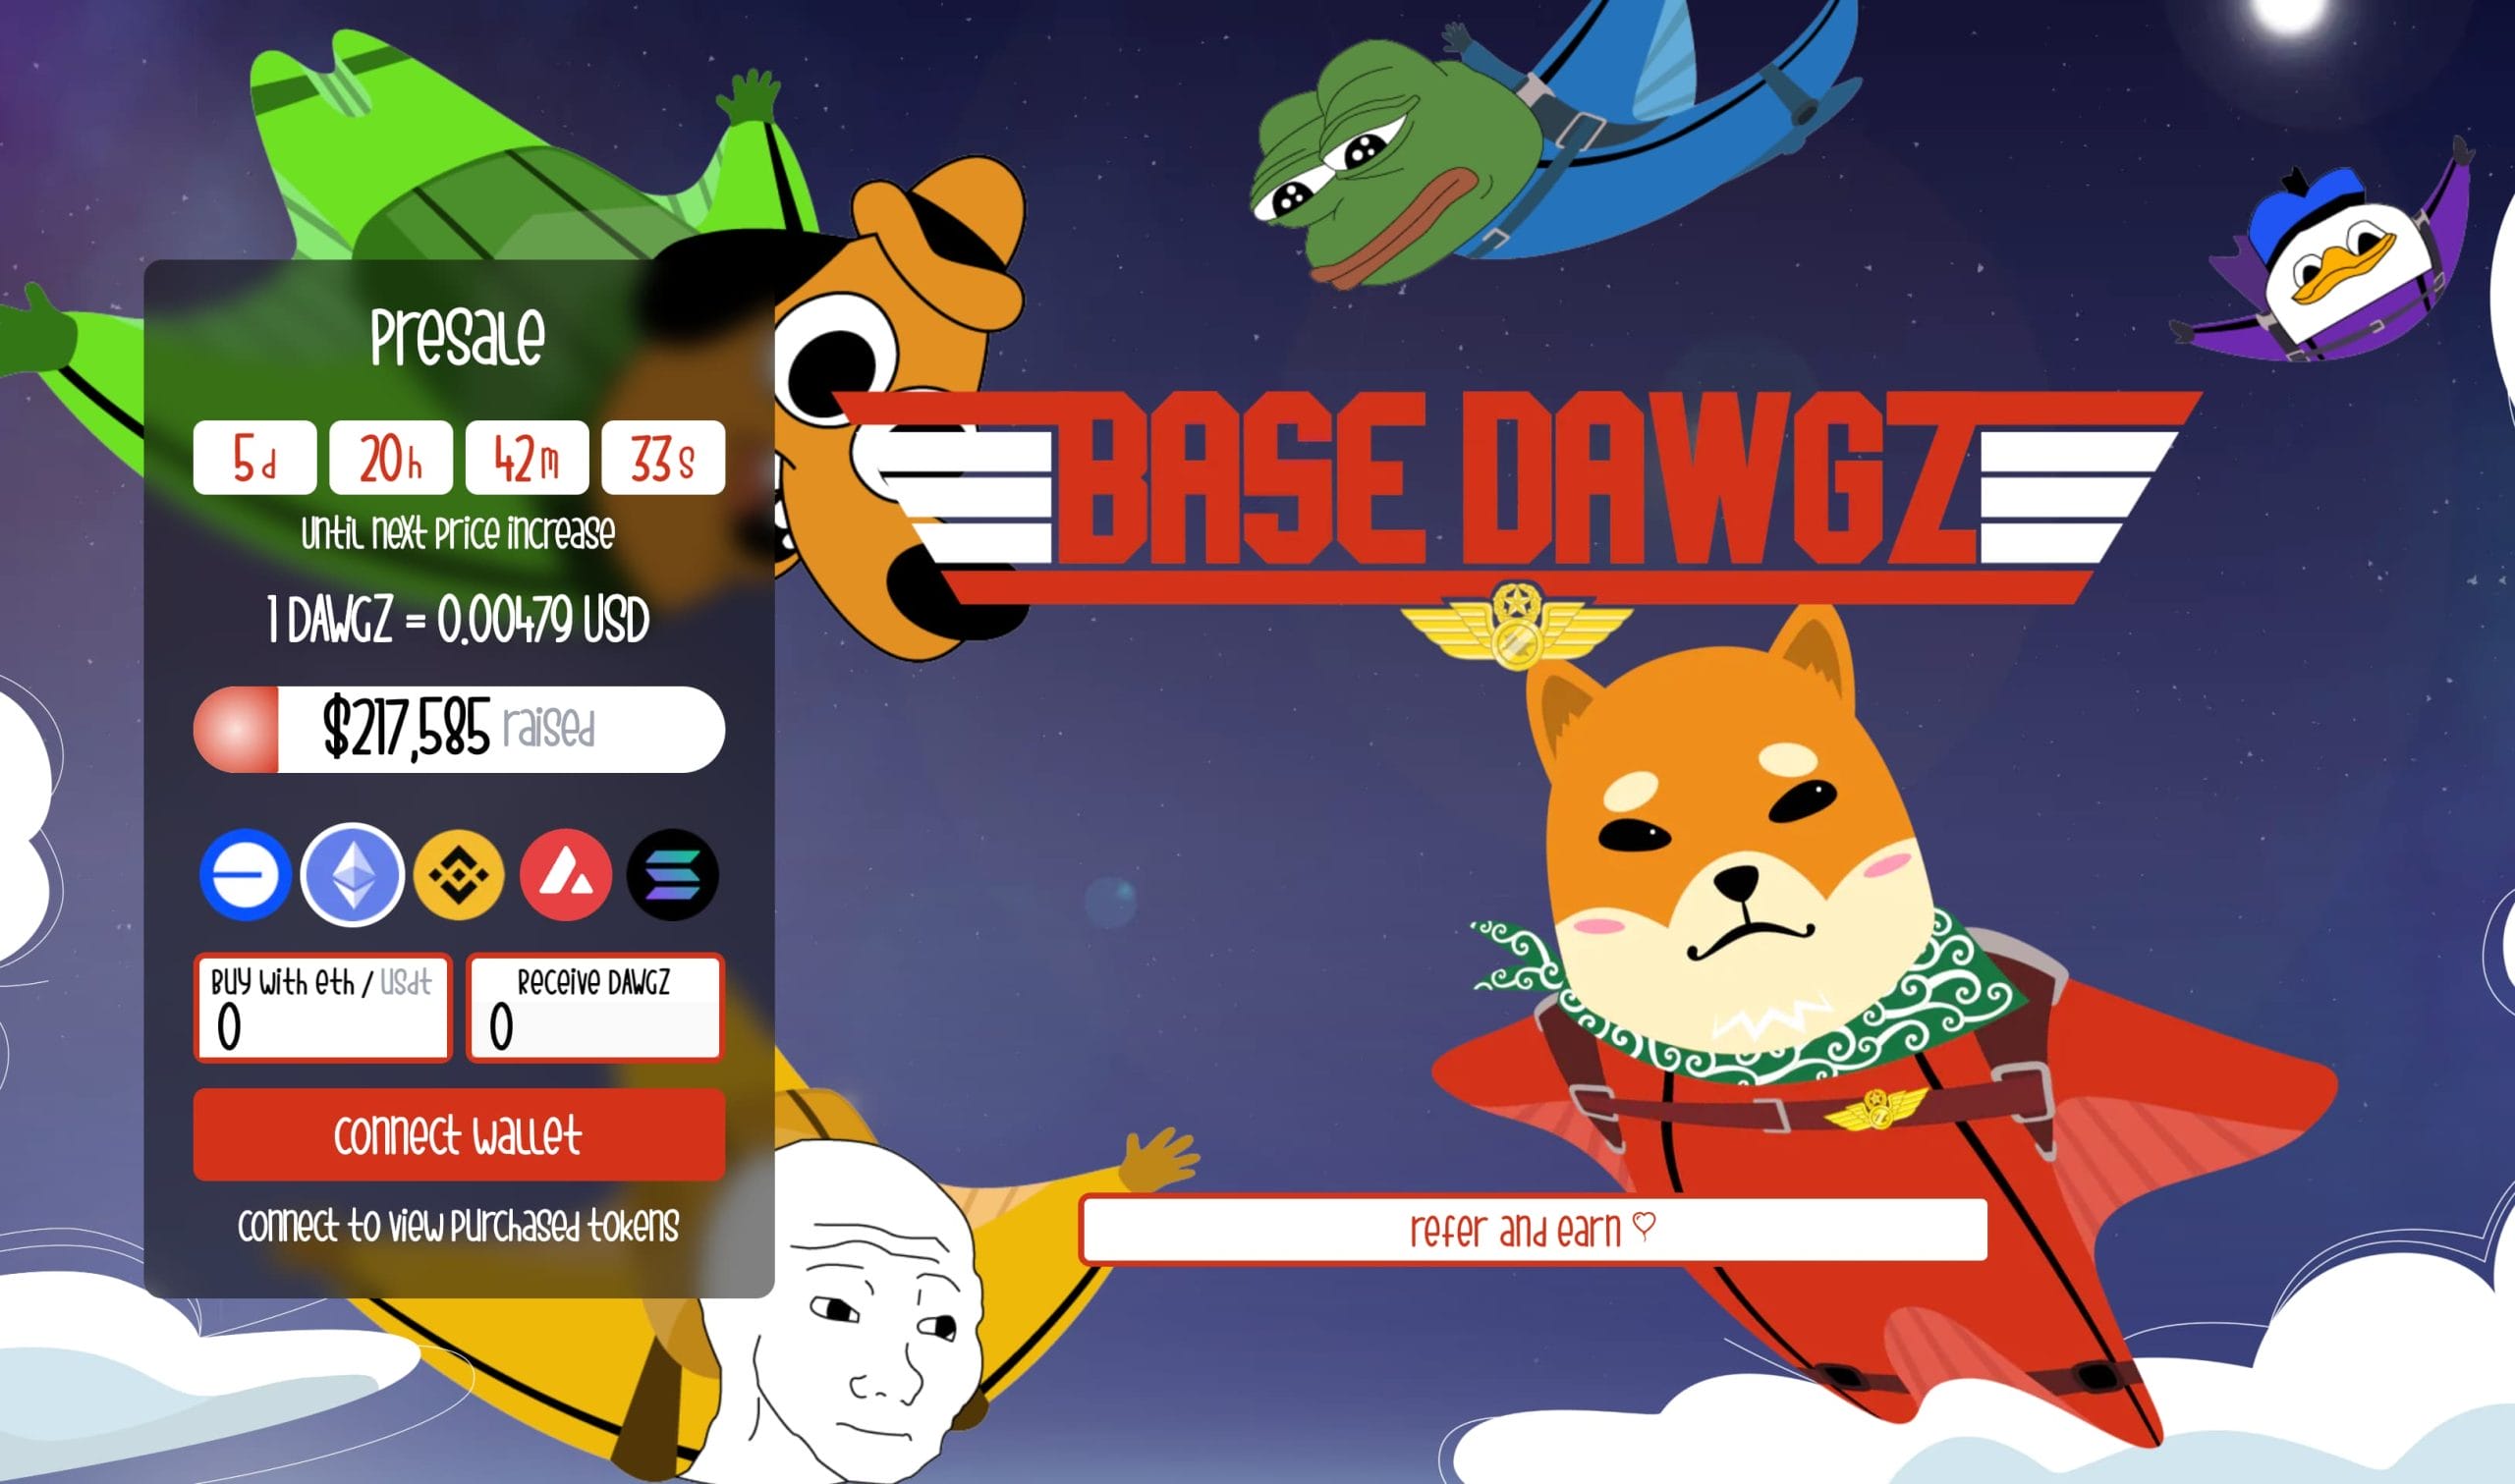 Base Dawgz landing page with presale counter